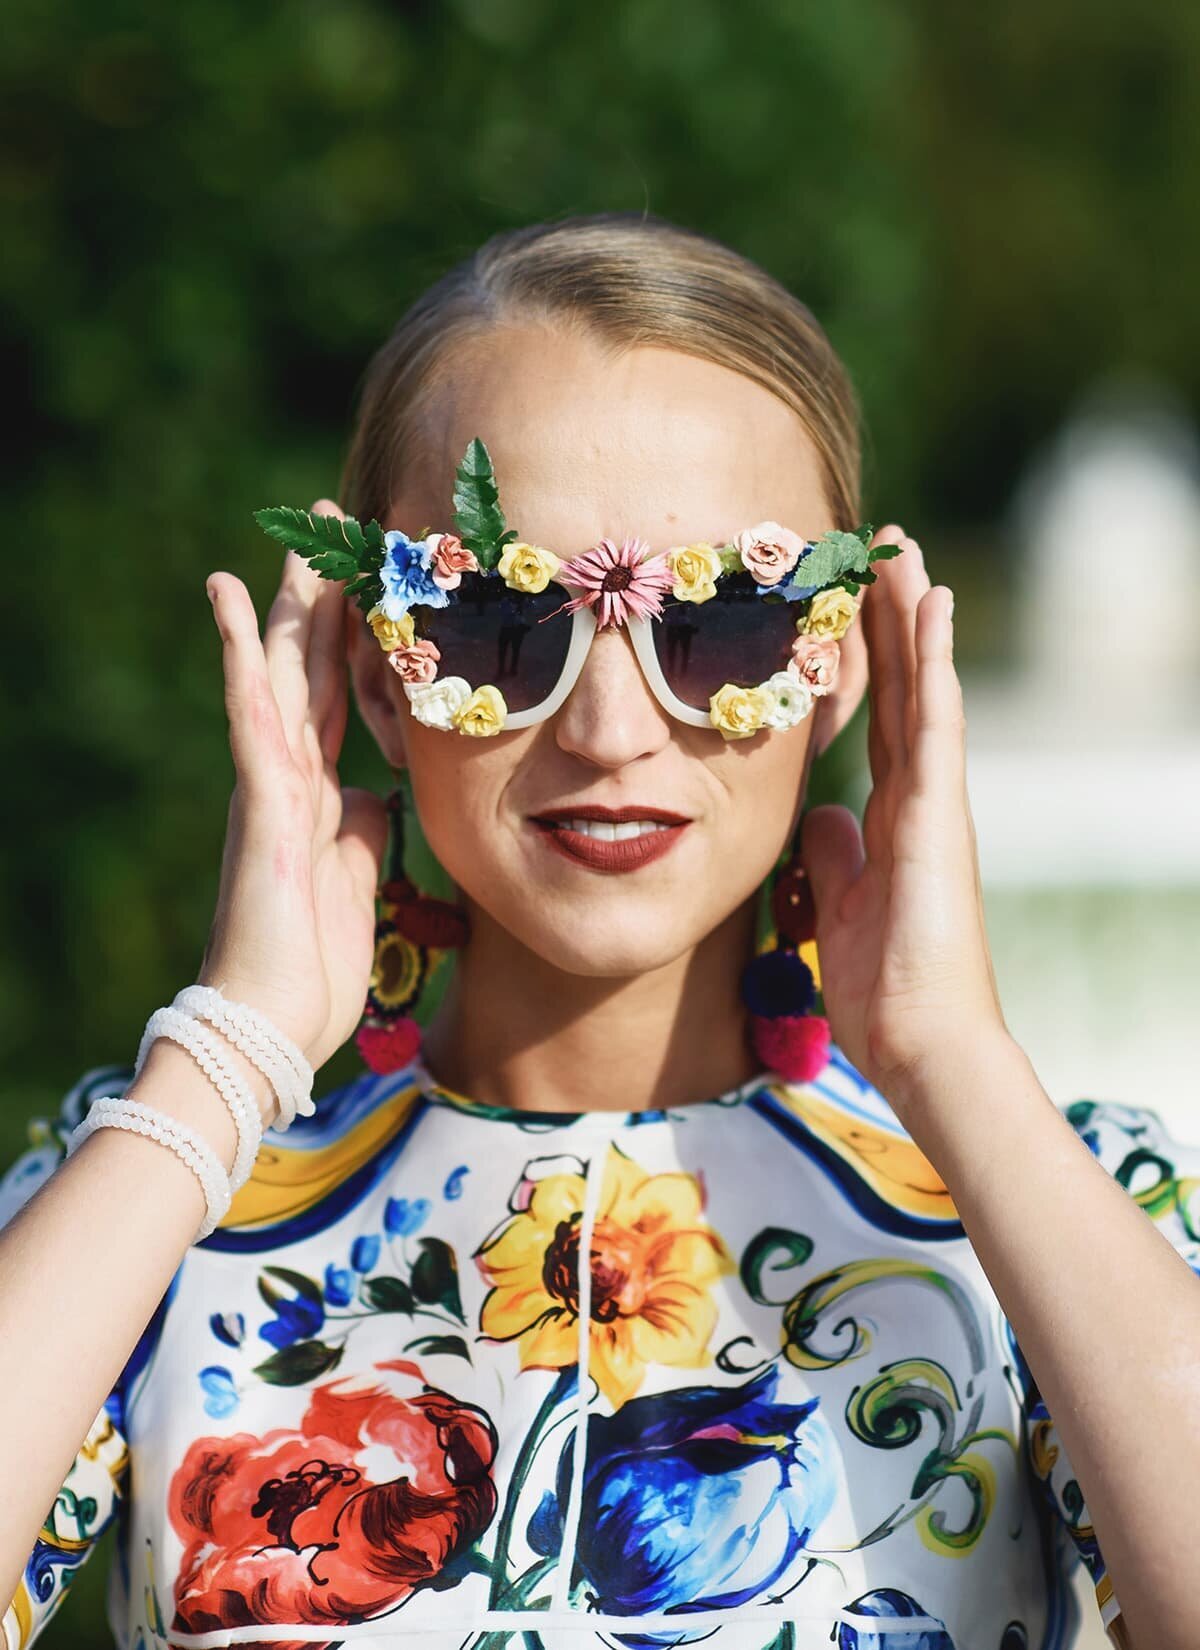 Woman wearing sunglasses decorated with flowers